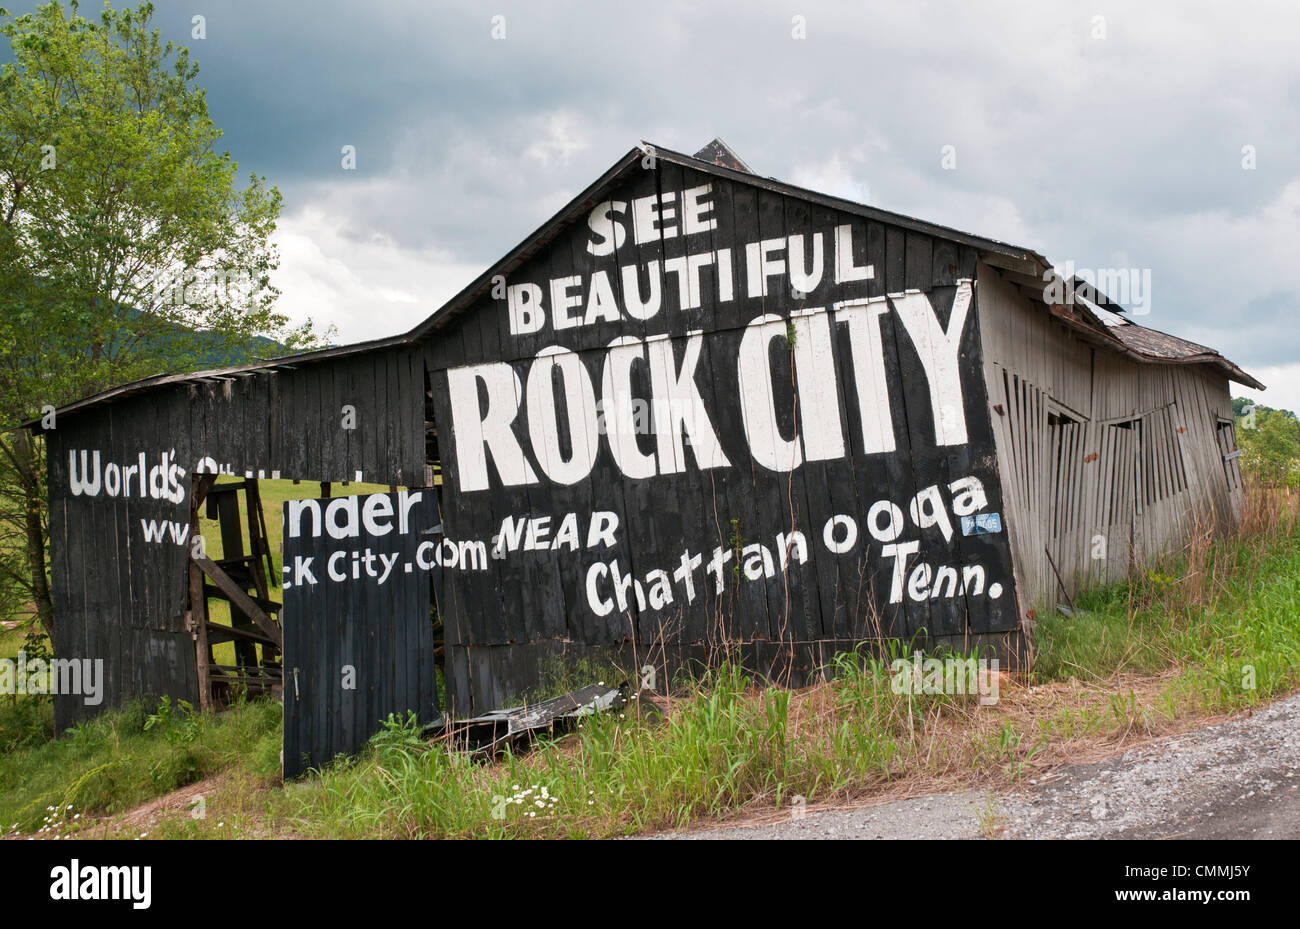 Advertisment for Rock City Gardens near Chattanooga, Tennessee painted on old wood barn in rural North Carolina. Stock Photo